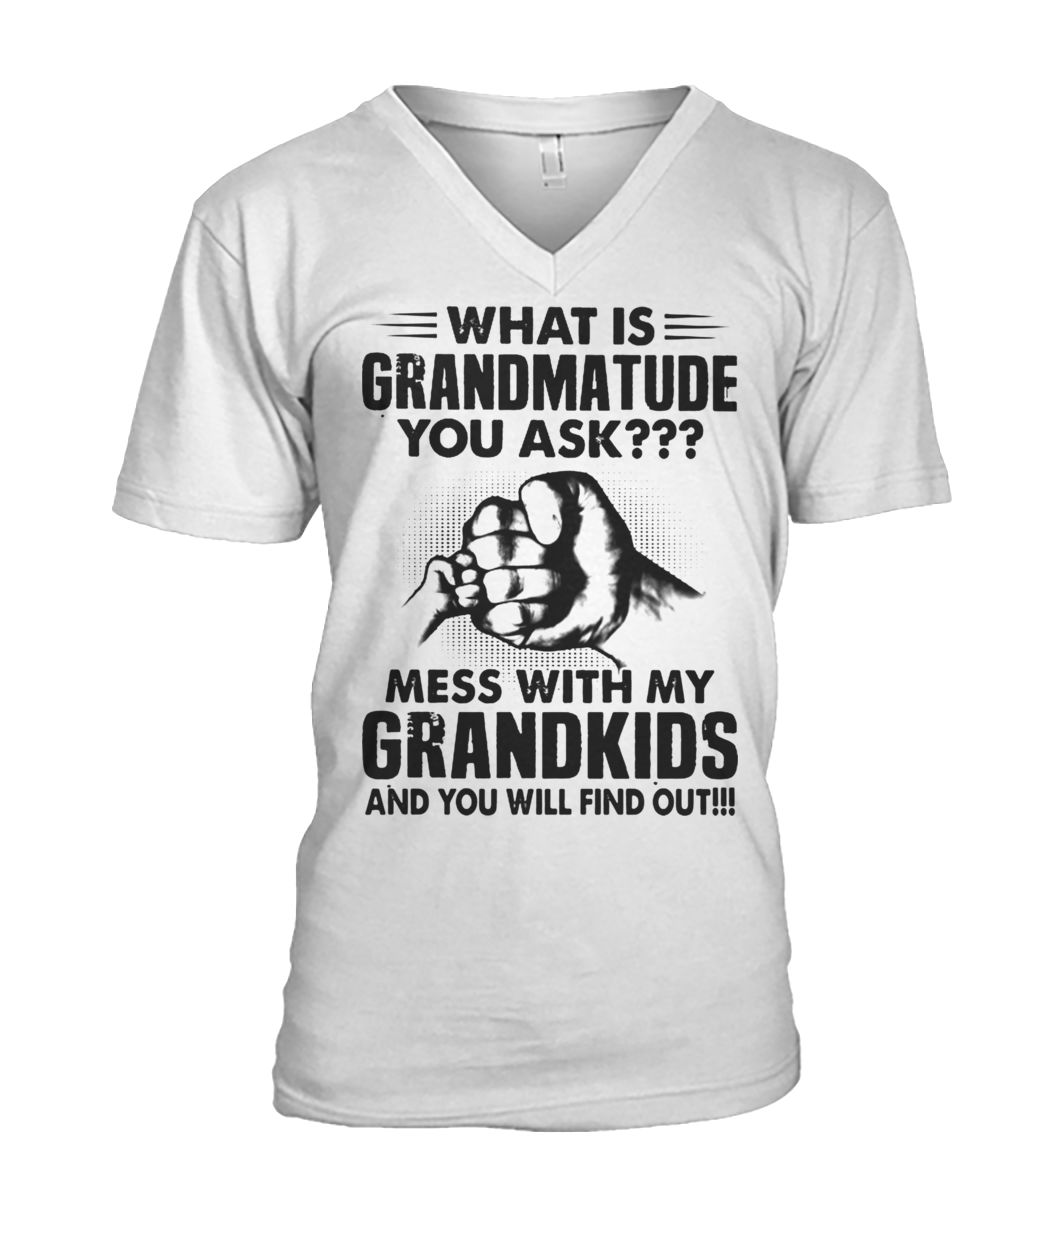 What is grandmatude you ask mess with my grandkids and you will find out mens v-neck